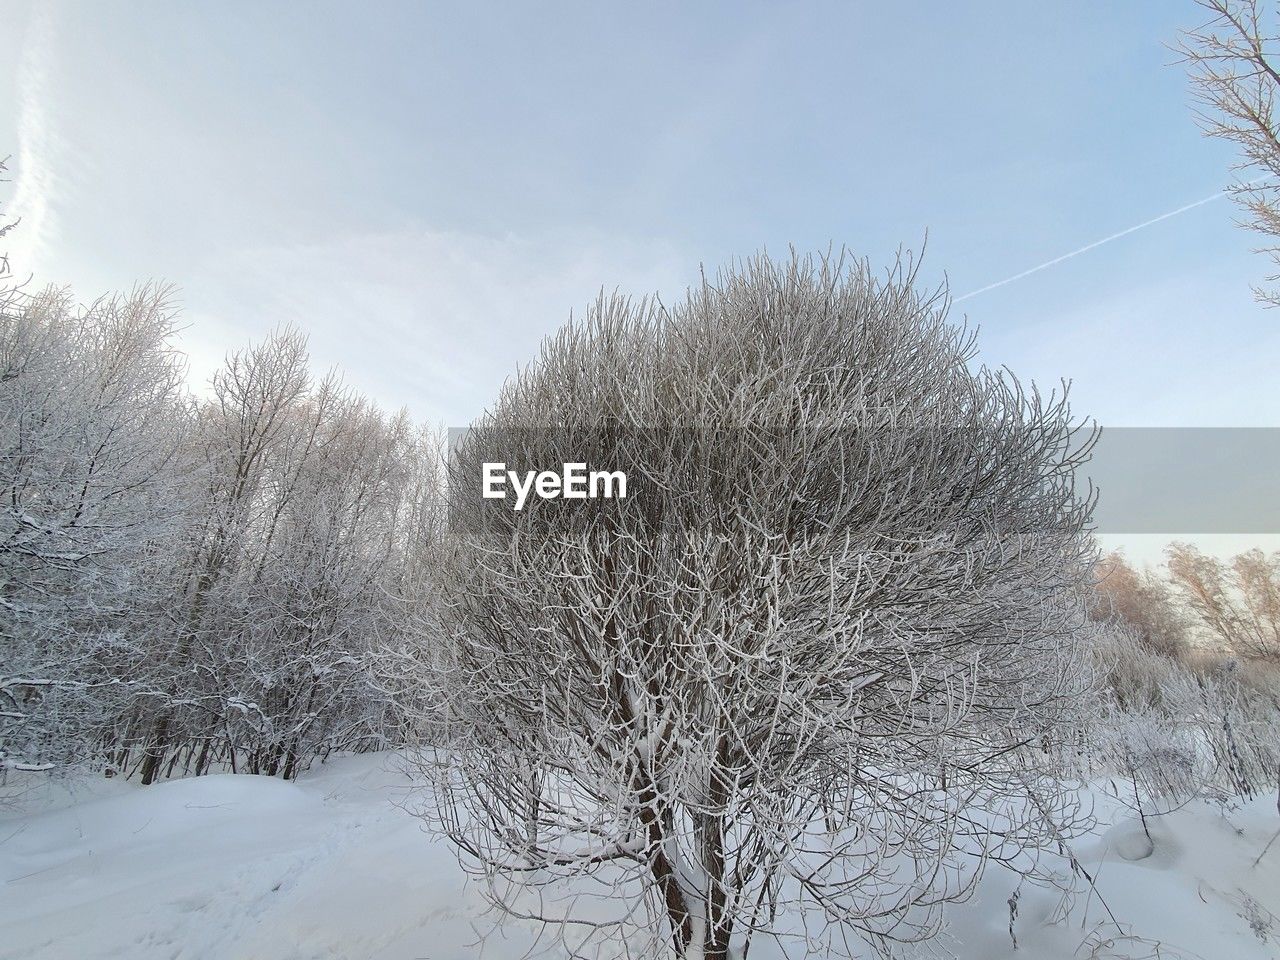 winter, frost, freezing, tree, snow, branch, plant, nature, ice, cold temperature, no people, sky, beauty in nature, tranquility, day, reflection, frozen, outdoors, scenics - nature, sunlight, environment, fog, water, bare tree, tranquil scene, low angle view, non-urban scene